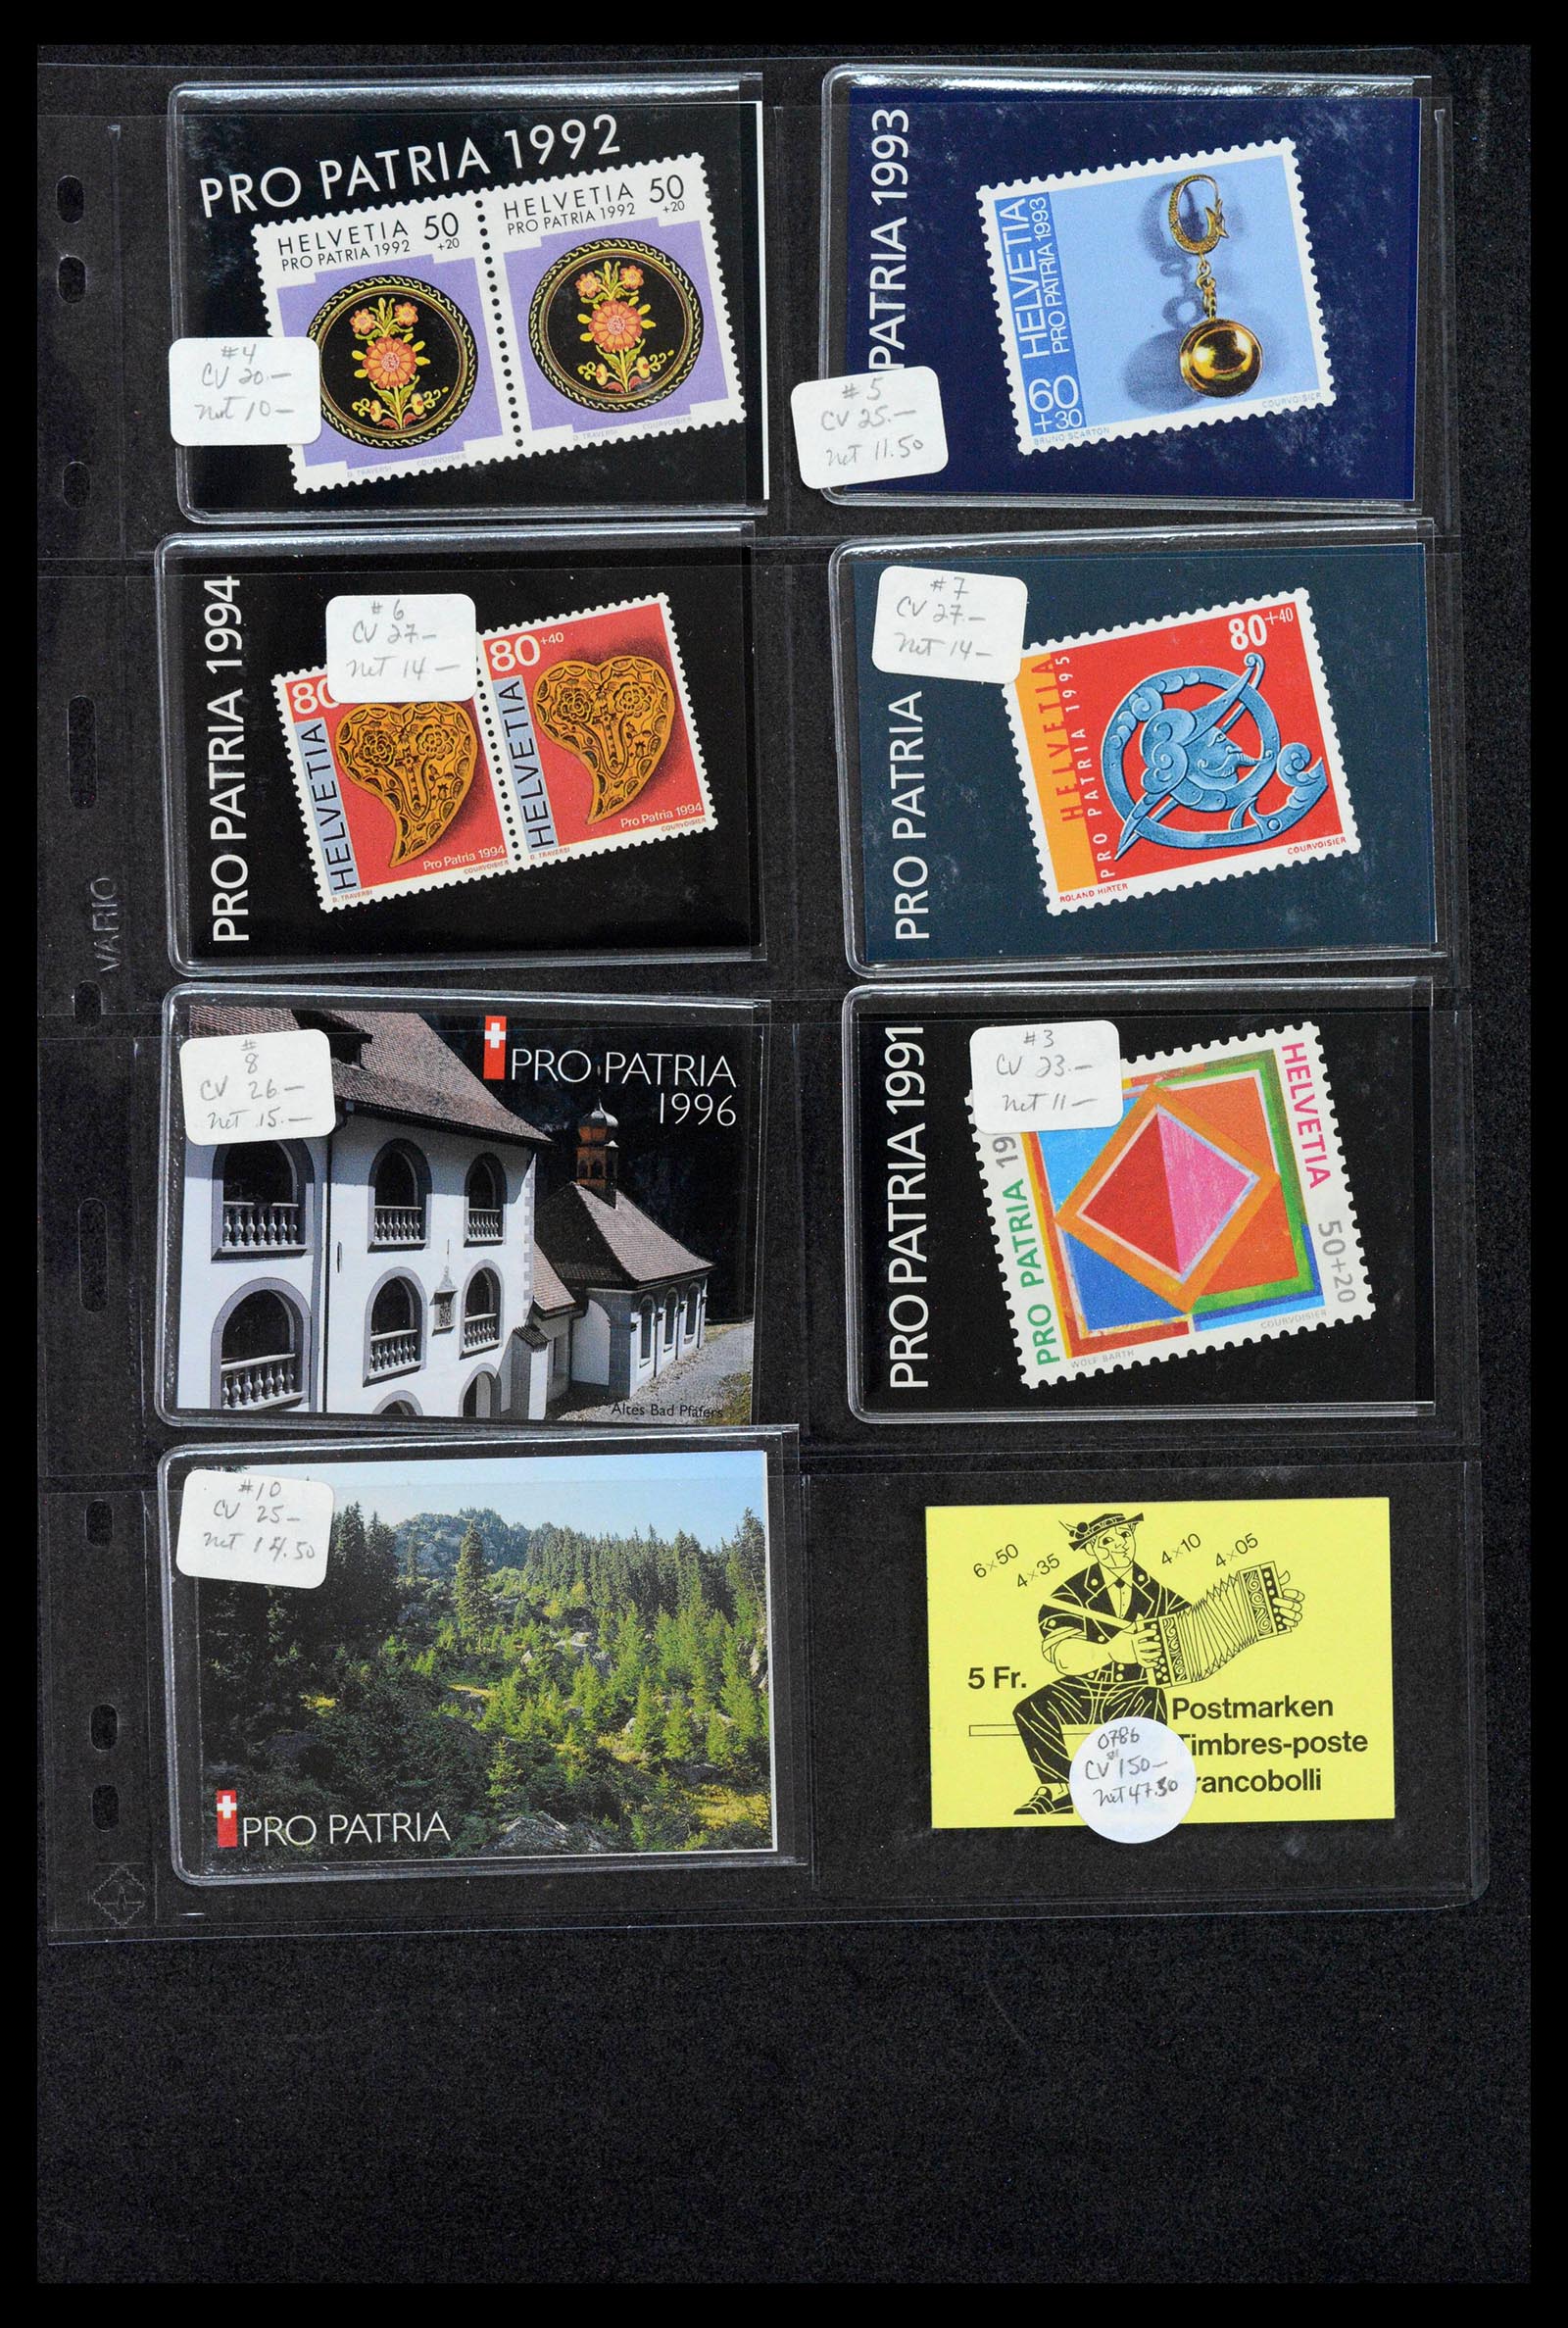 39091 0027 - Stamp collection 39091 Switzerland stamp booklets 1953-2005.